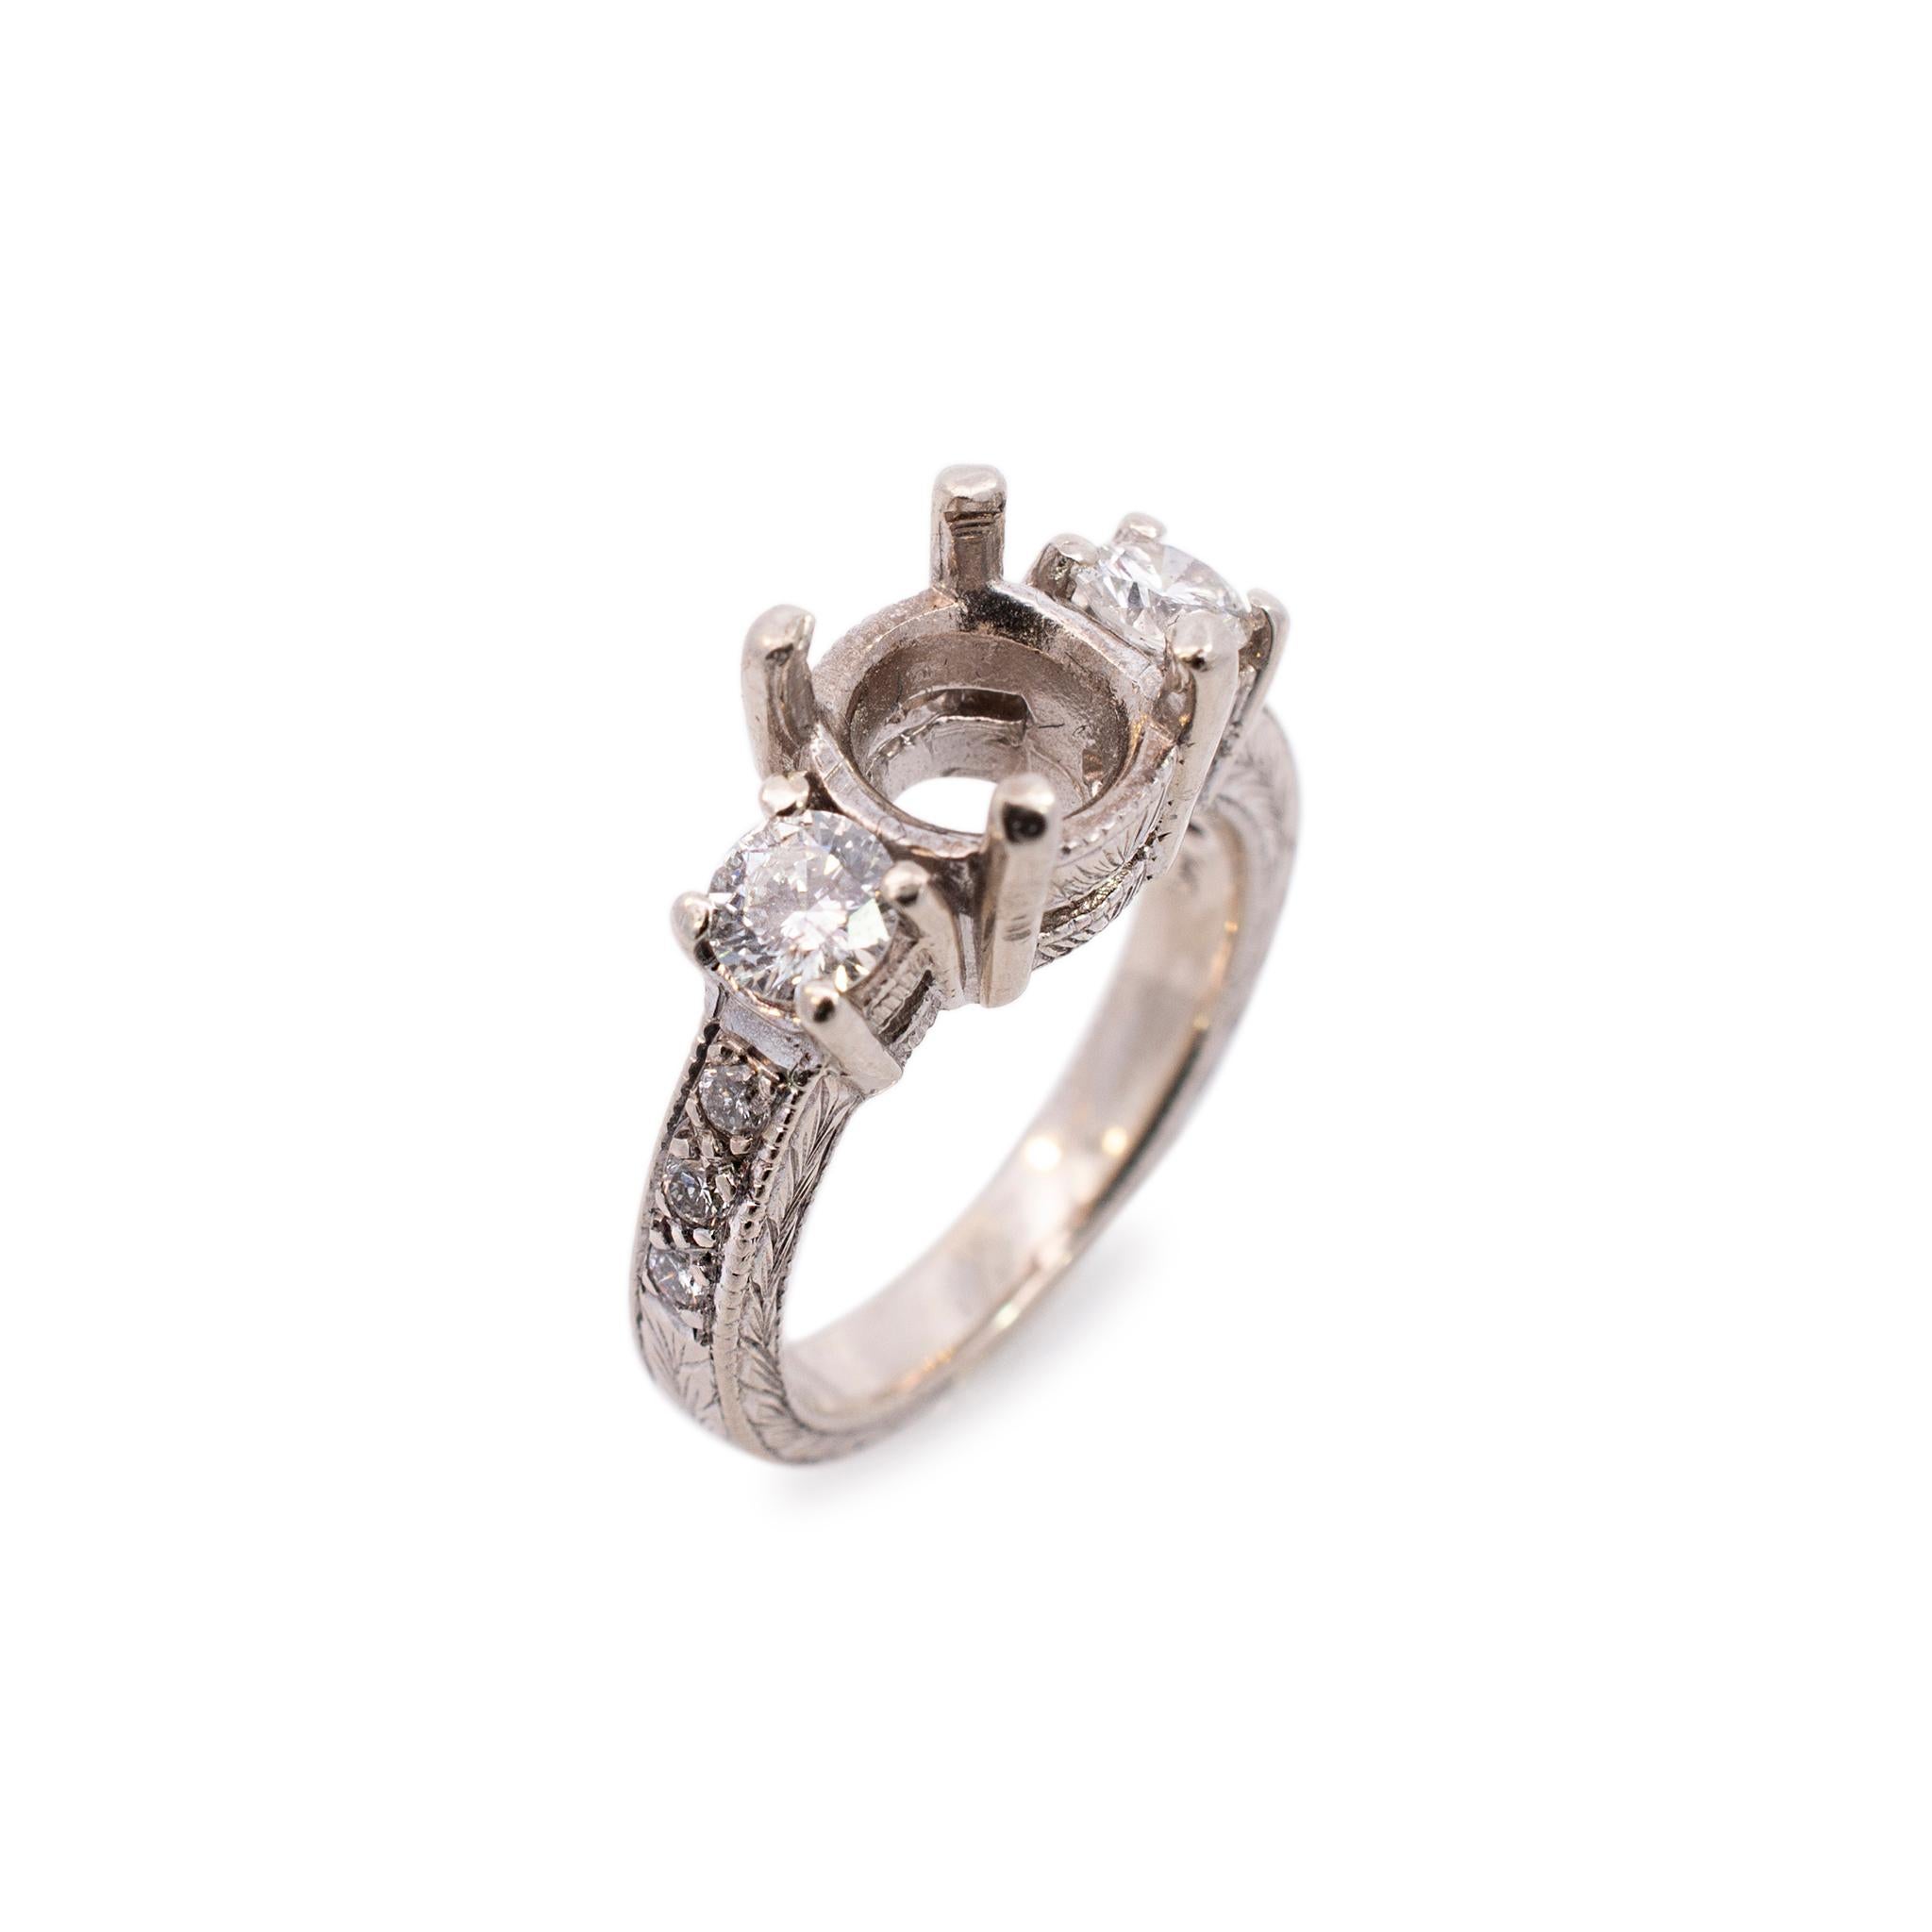 One lady's custom made textured & polished rhodium plated 14K white gold, diamond engagement, semi-mount ring with a soft-square shank. The ring is a size 4.5. The ring weighs a total of 5.60 grams. Engraved with 